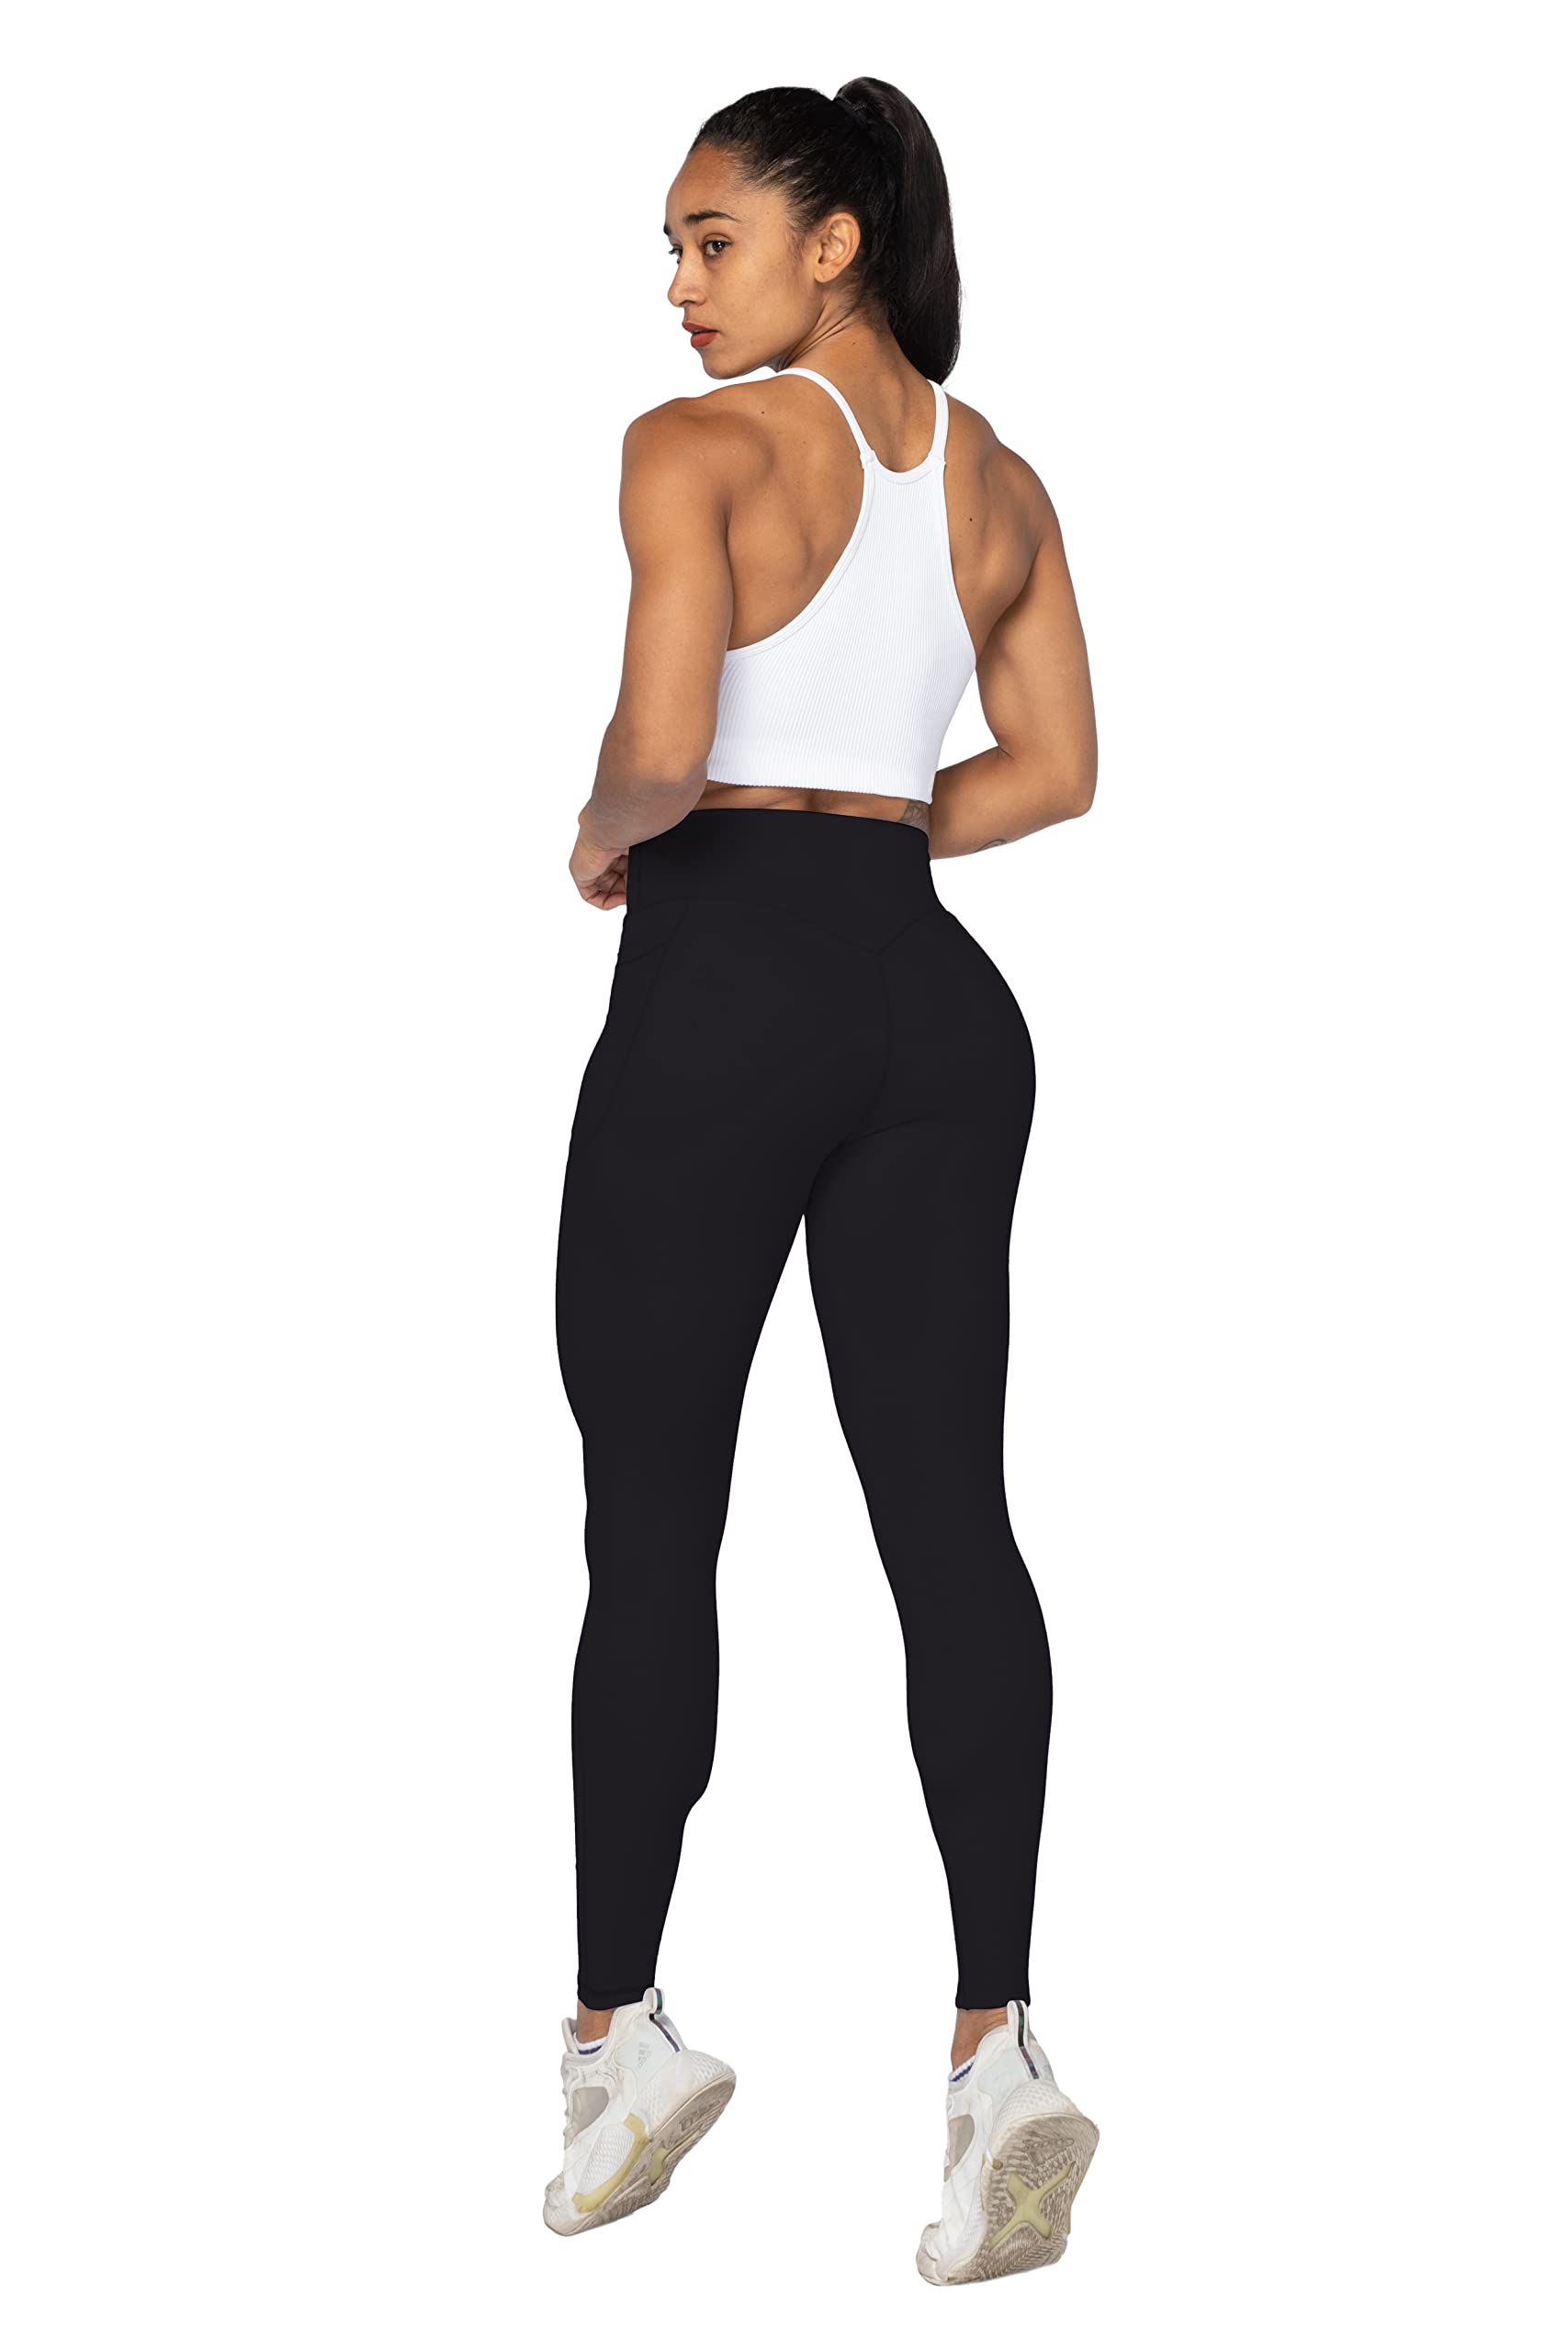 Sunzel No Front Seam Workout Leggings for Women with Pockets, High